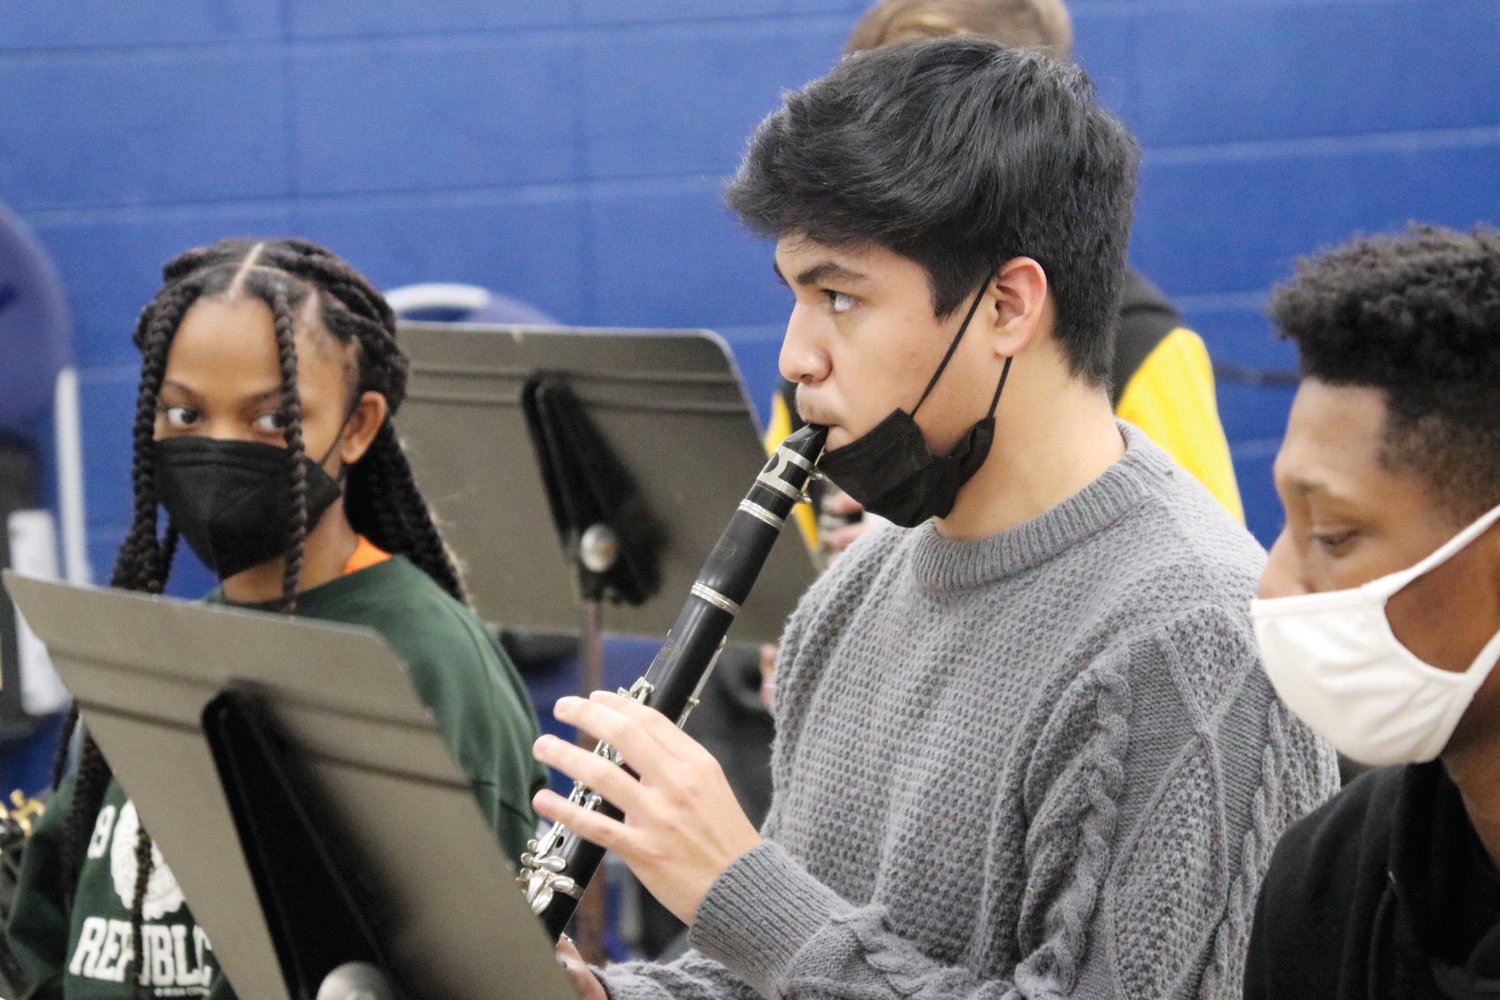 J-M student Yahir Gonzalez plays the clarinet during an afternoon workshop led by La Fiesta Latin Jazz Sextet last Friday inside J-M.